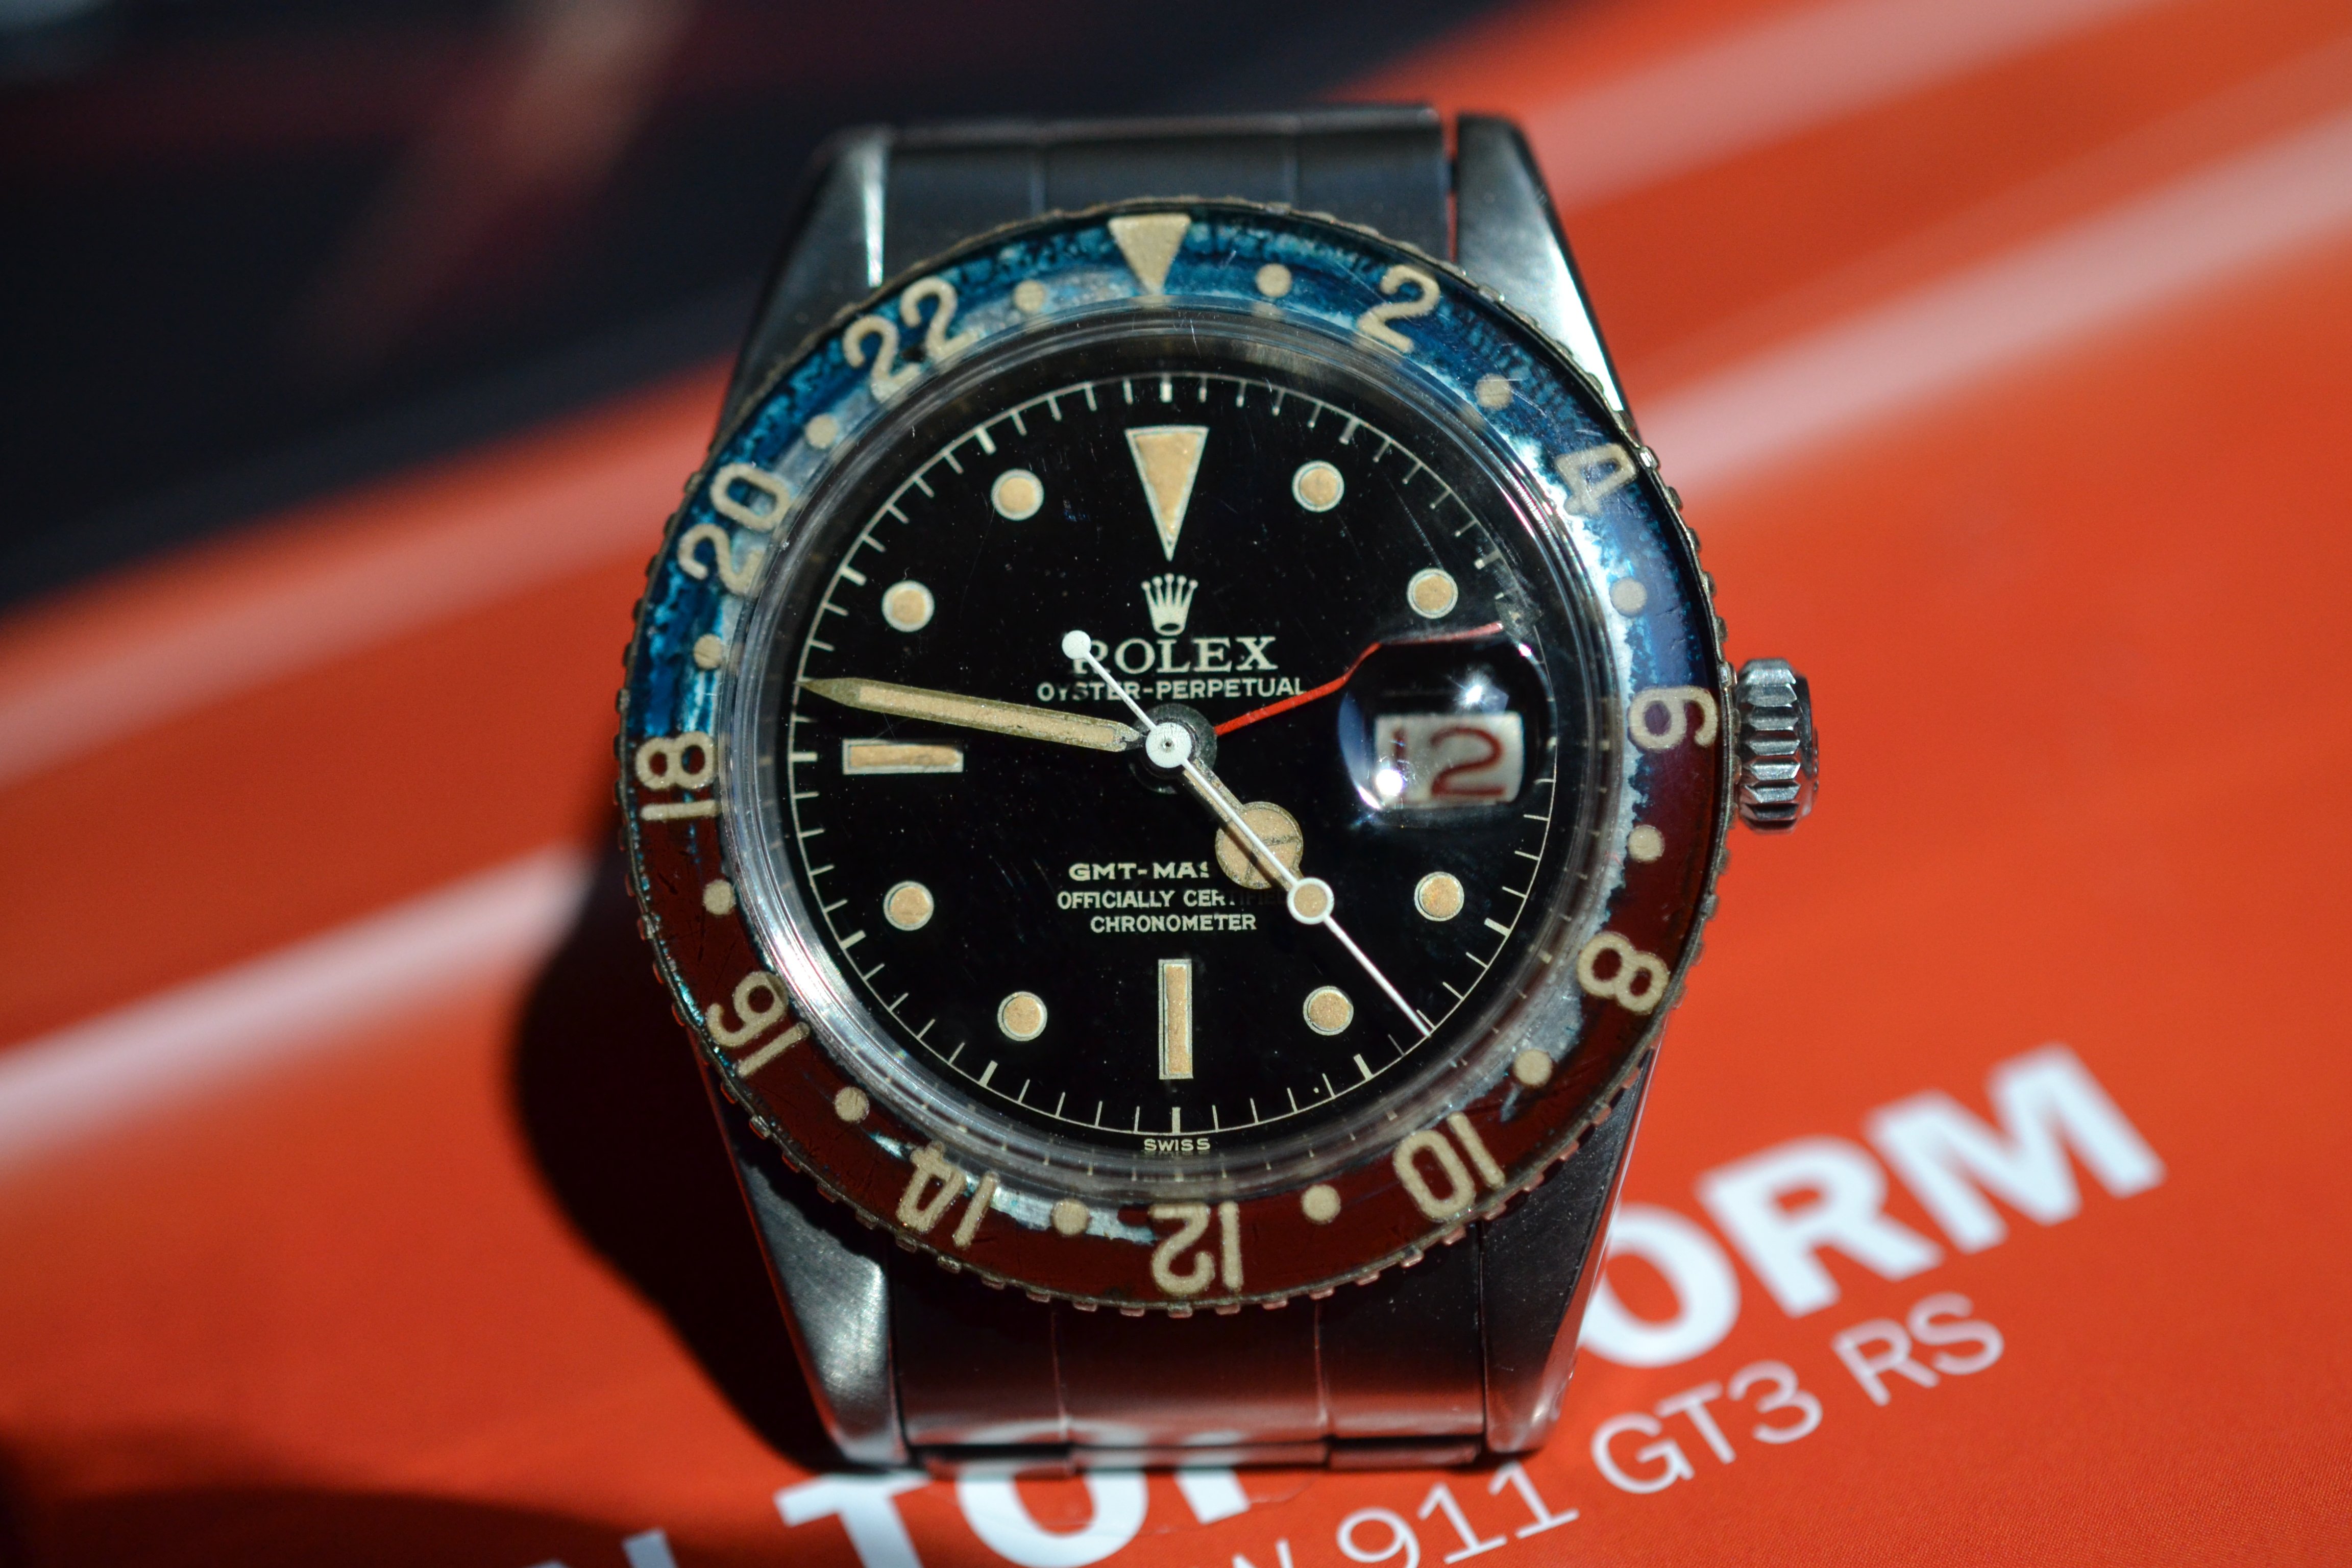 The GMT-Master Ref. 6542 Is A Classic 